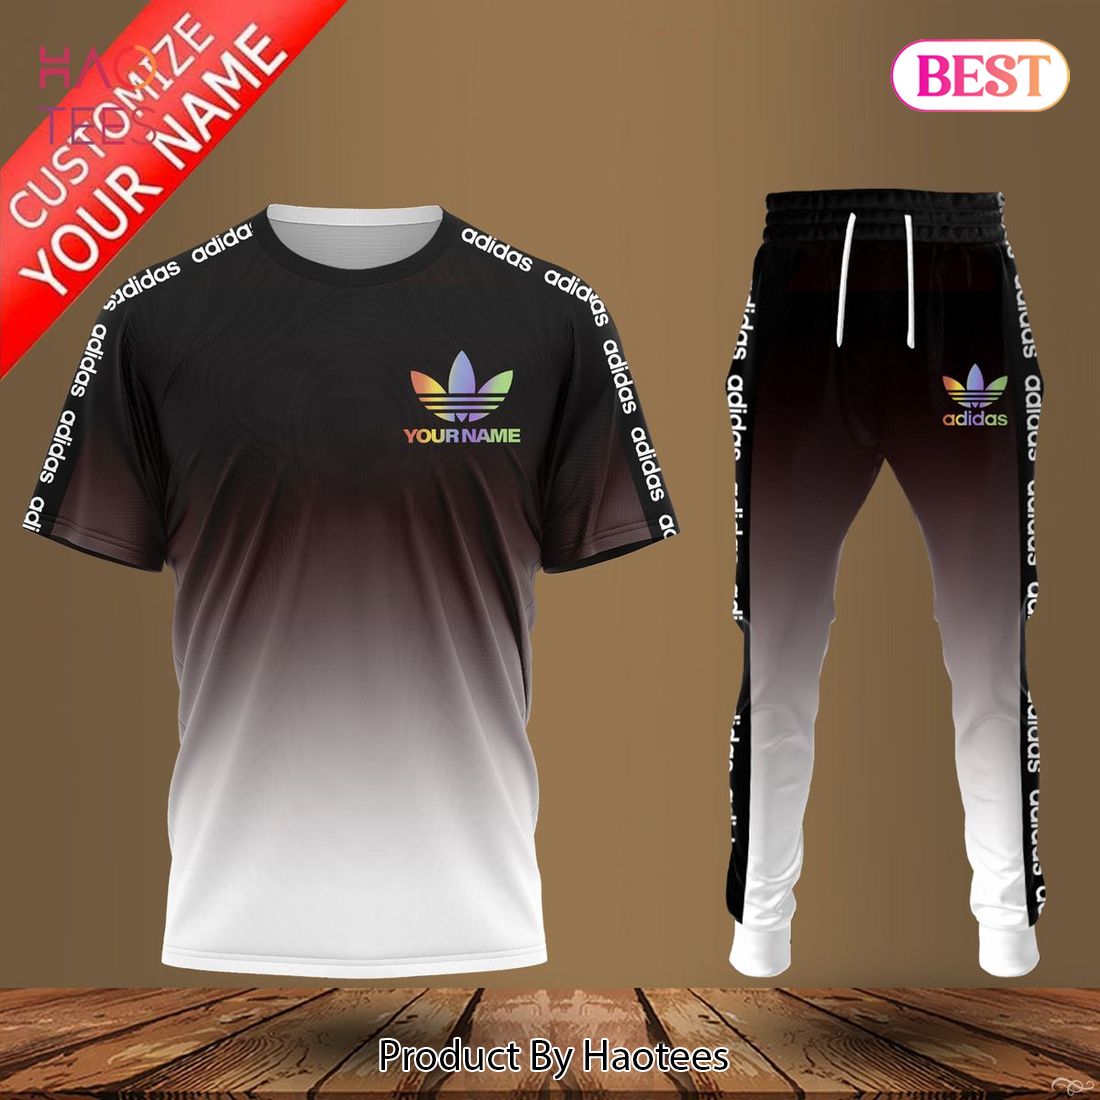 THE BEST Adidas Ombre Black White Luxury Brand T-Shirt And Pants All Over Printed